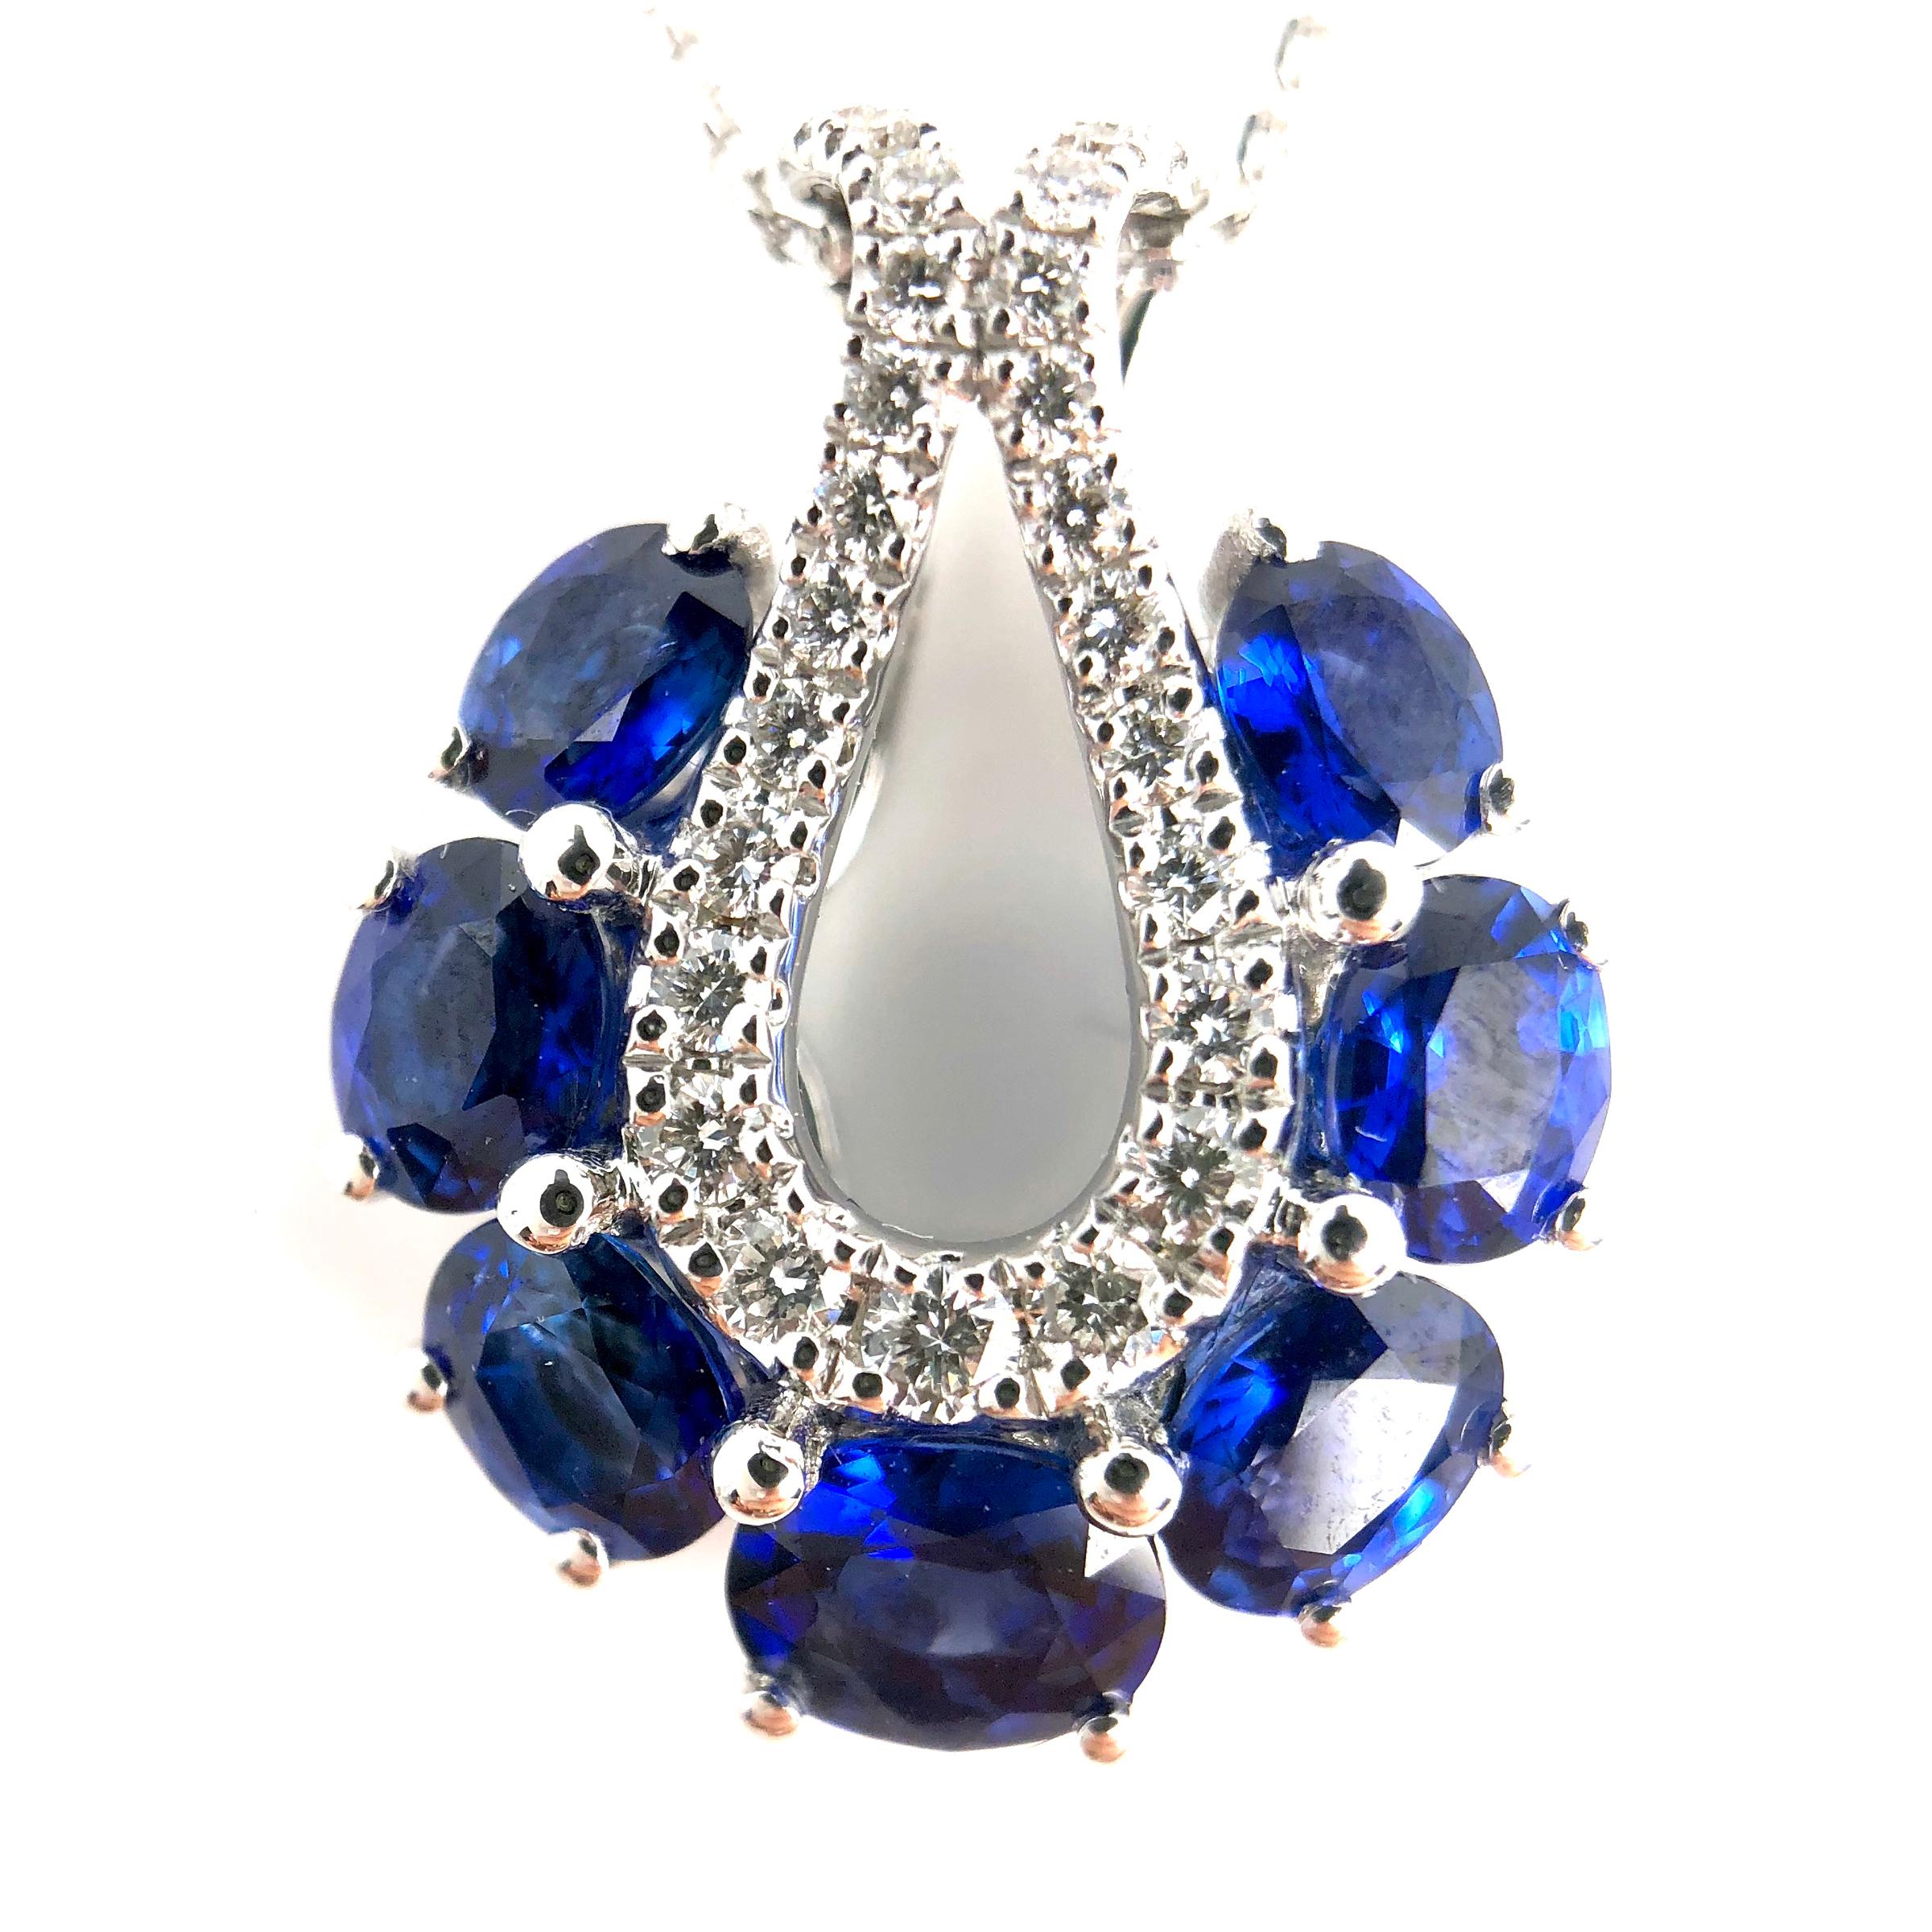 This lovely halo pendant features seven oval cut blue Sapphires, total 2.01 carats, encircling an open teardrop setting of round white diamonds.

Center: 2.01 carats blue sapphire
Diamond Halo: 25 round diamonds total 0.26 carats
Set in 18k White